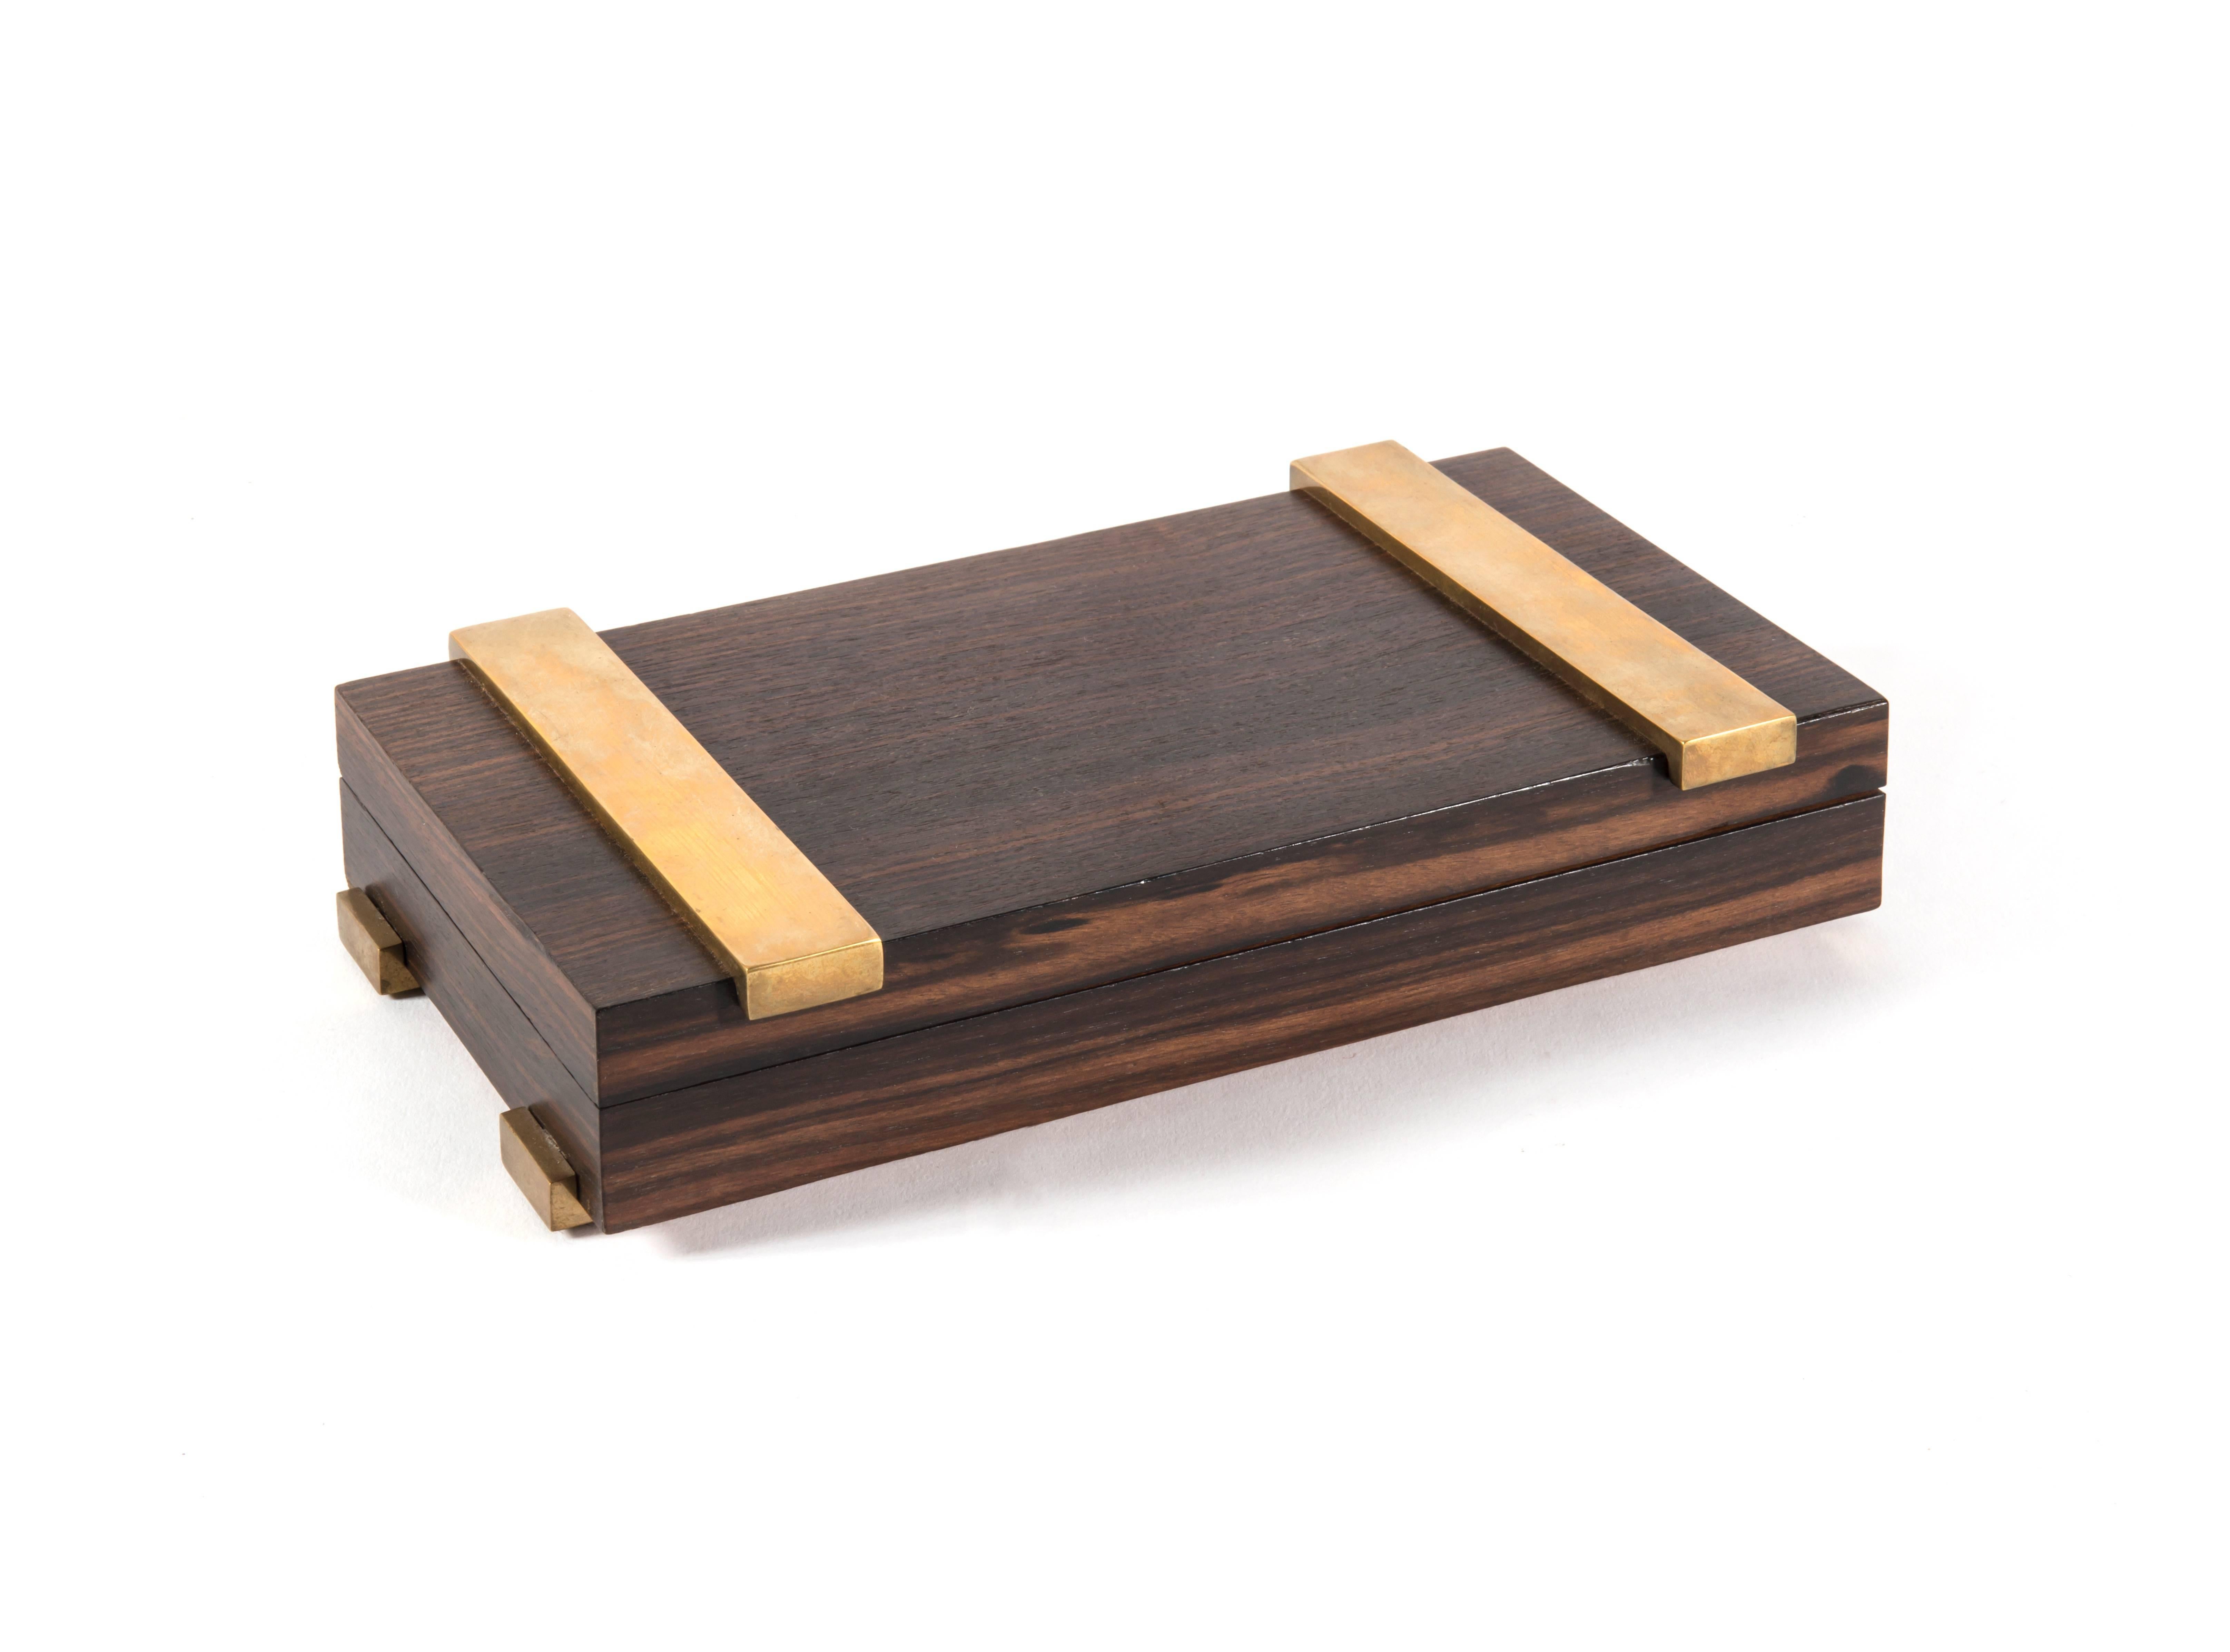 Cigarette box in Macassar ebony veneer and brass. Stamped with 